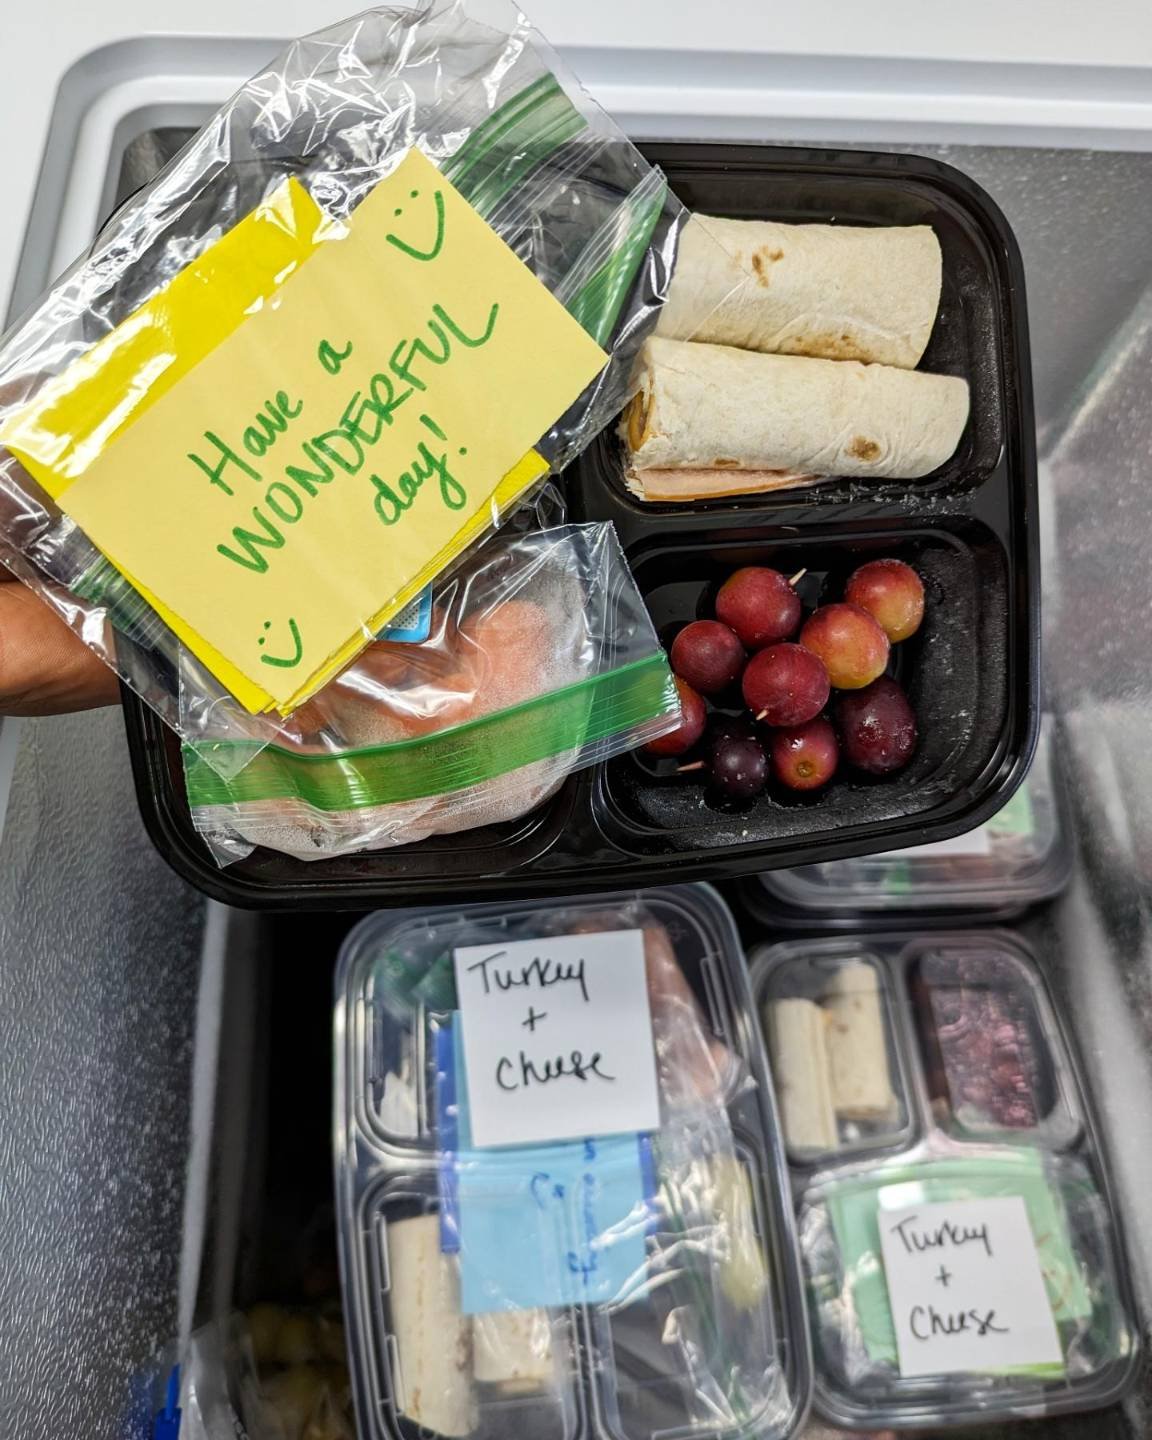 Huge thank you to Home Church Roswell @homechurchroswell for helping us stock up our freezer! They put together 50 lunchables with delicious and healthy food choices like grapes, carrots, and ham/turkey wraps for our MAPkids to enjoy during spring br